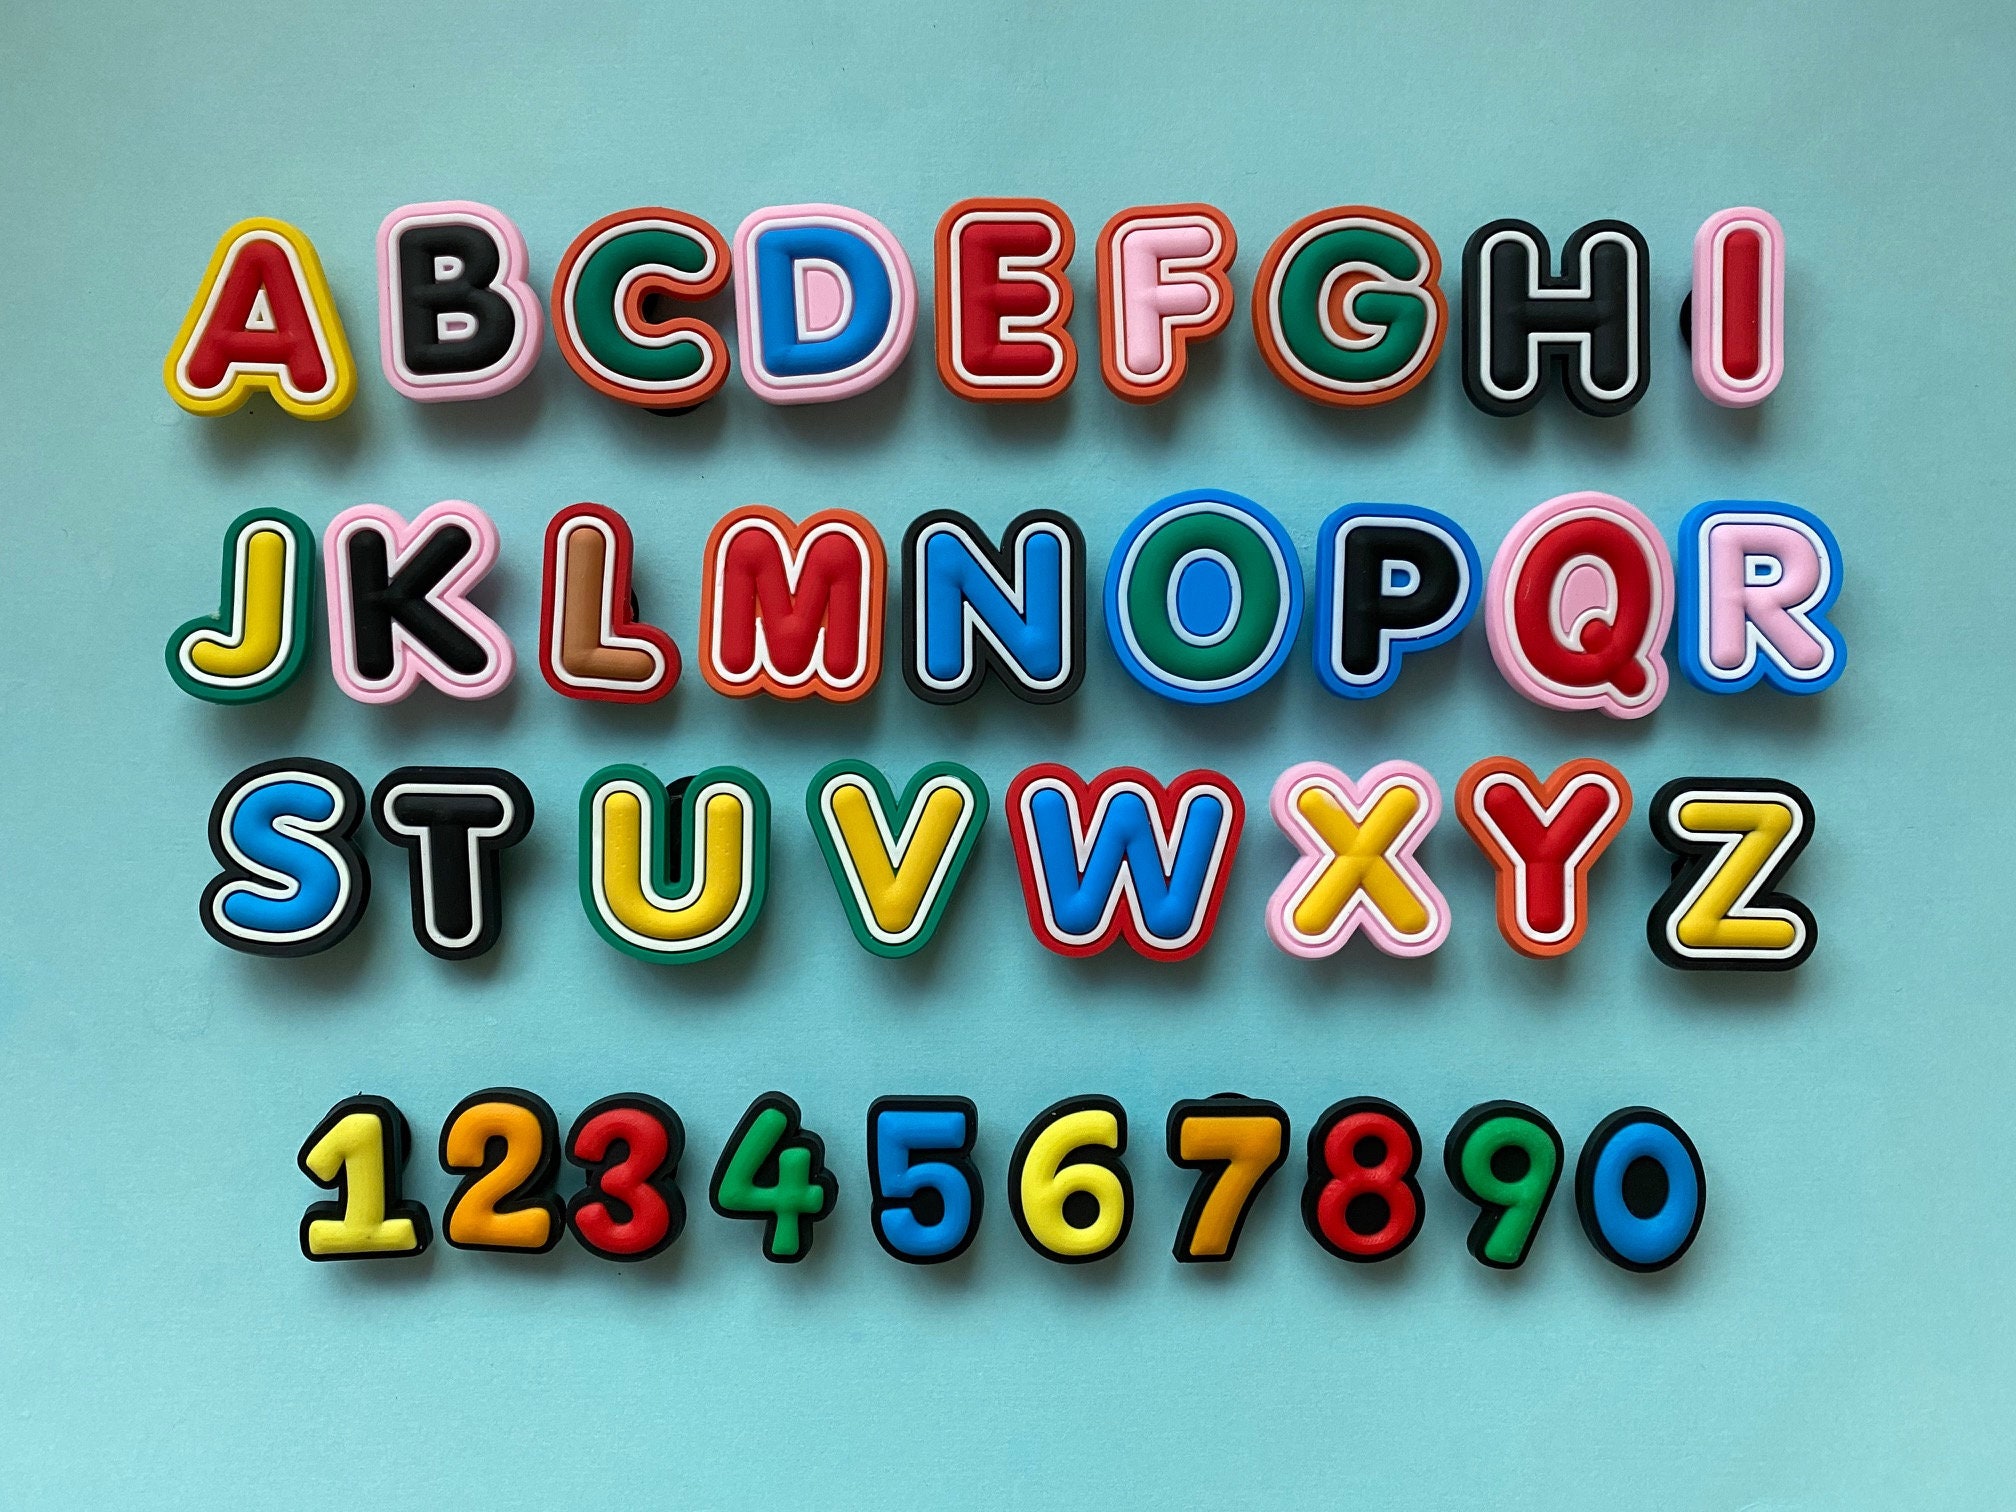 Discontinued Items SMALL LETTER a z Plastic Crocs Shoes Letter